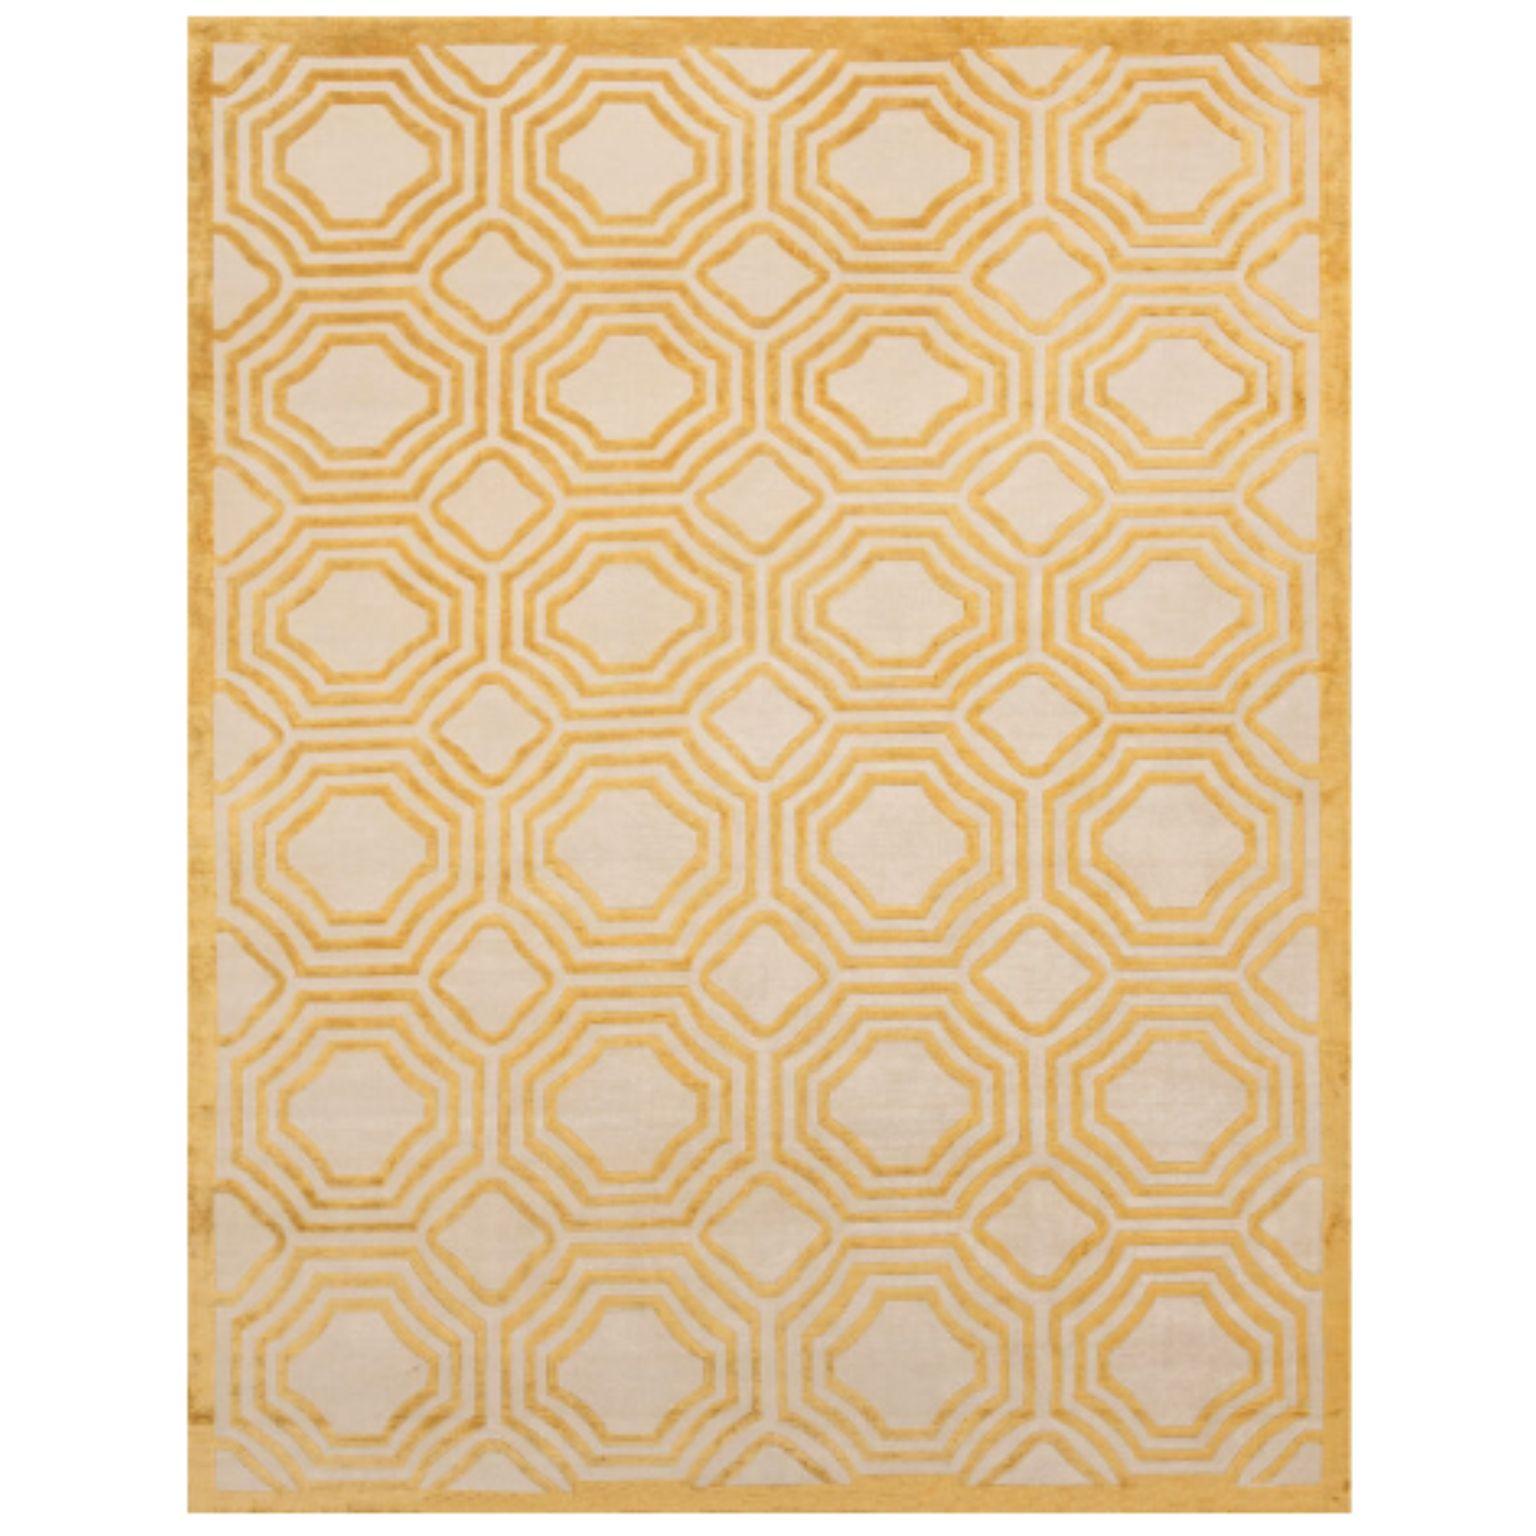 ROCKWELL 200 ug by Illulian
Dimensions: D300 x H200 cm 
Materials: Wool 50%, Silk 50%
Variations available and prices may vary according to materials and sizes.

Illulian, historic and prestigious rug company brand, internationally renowned in